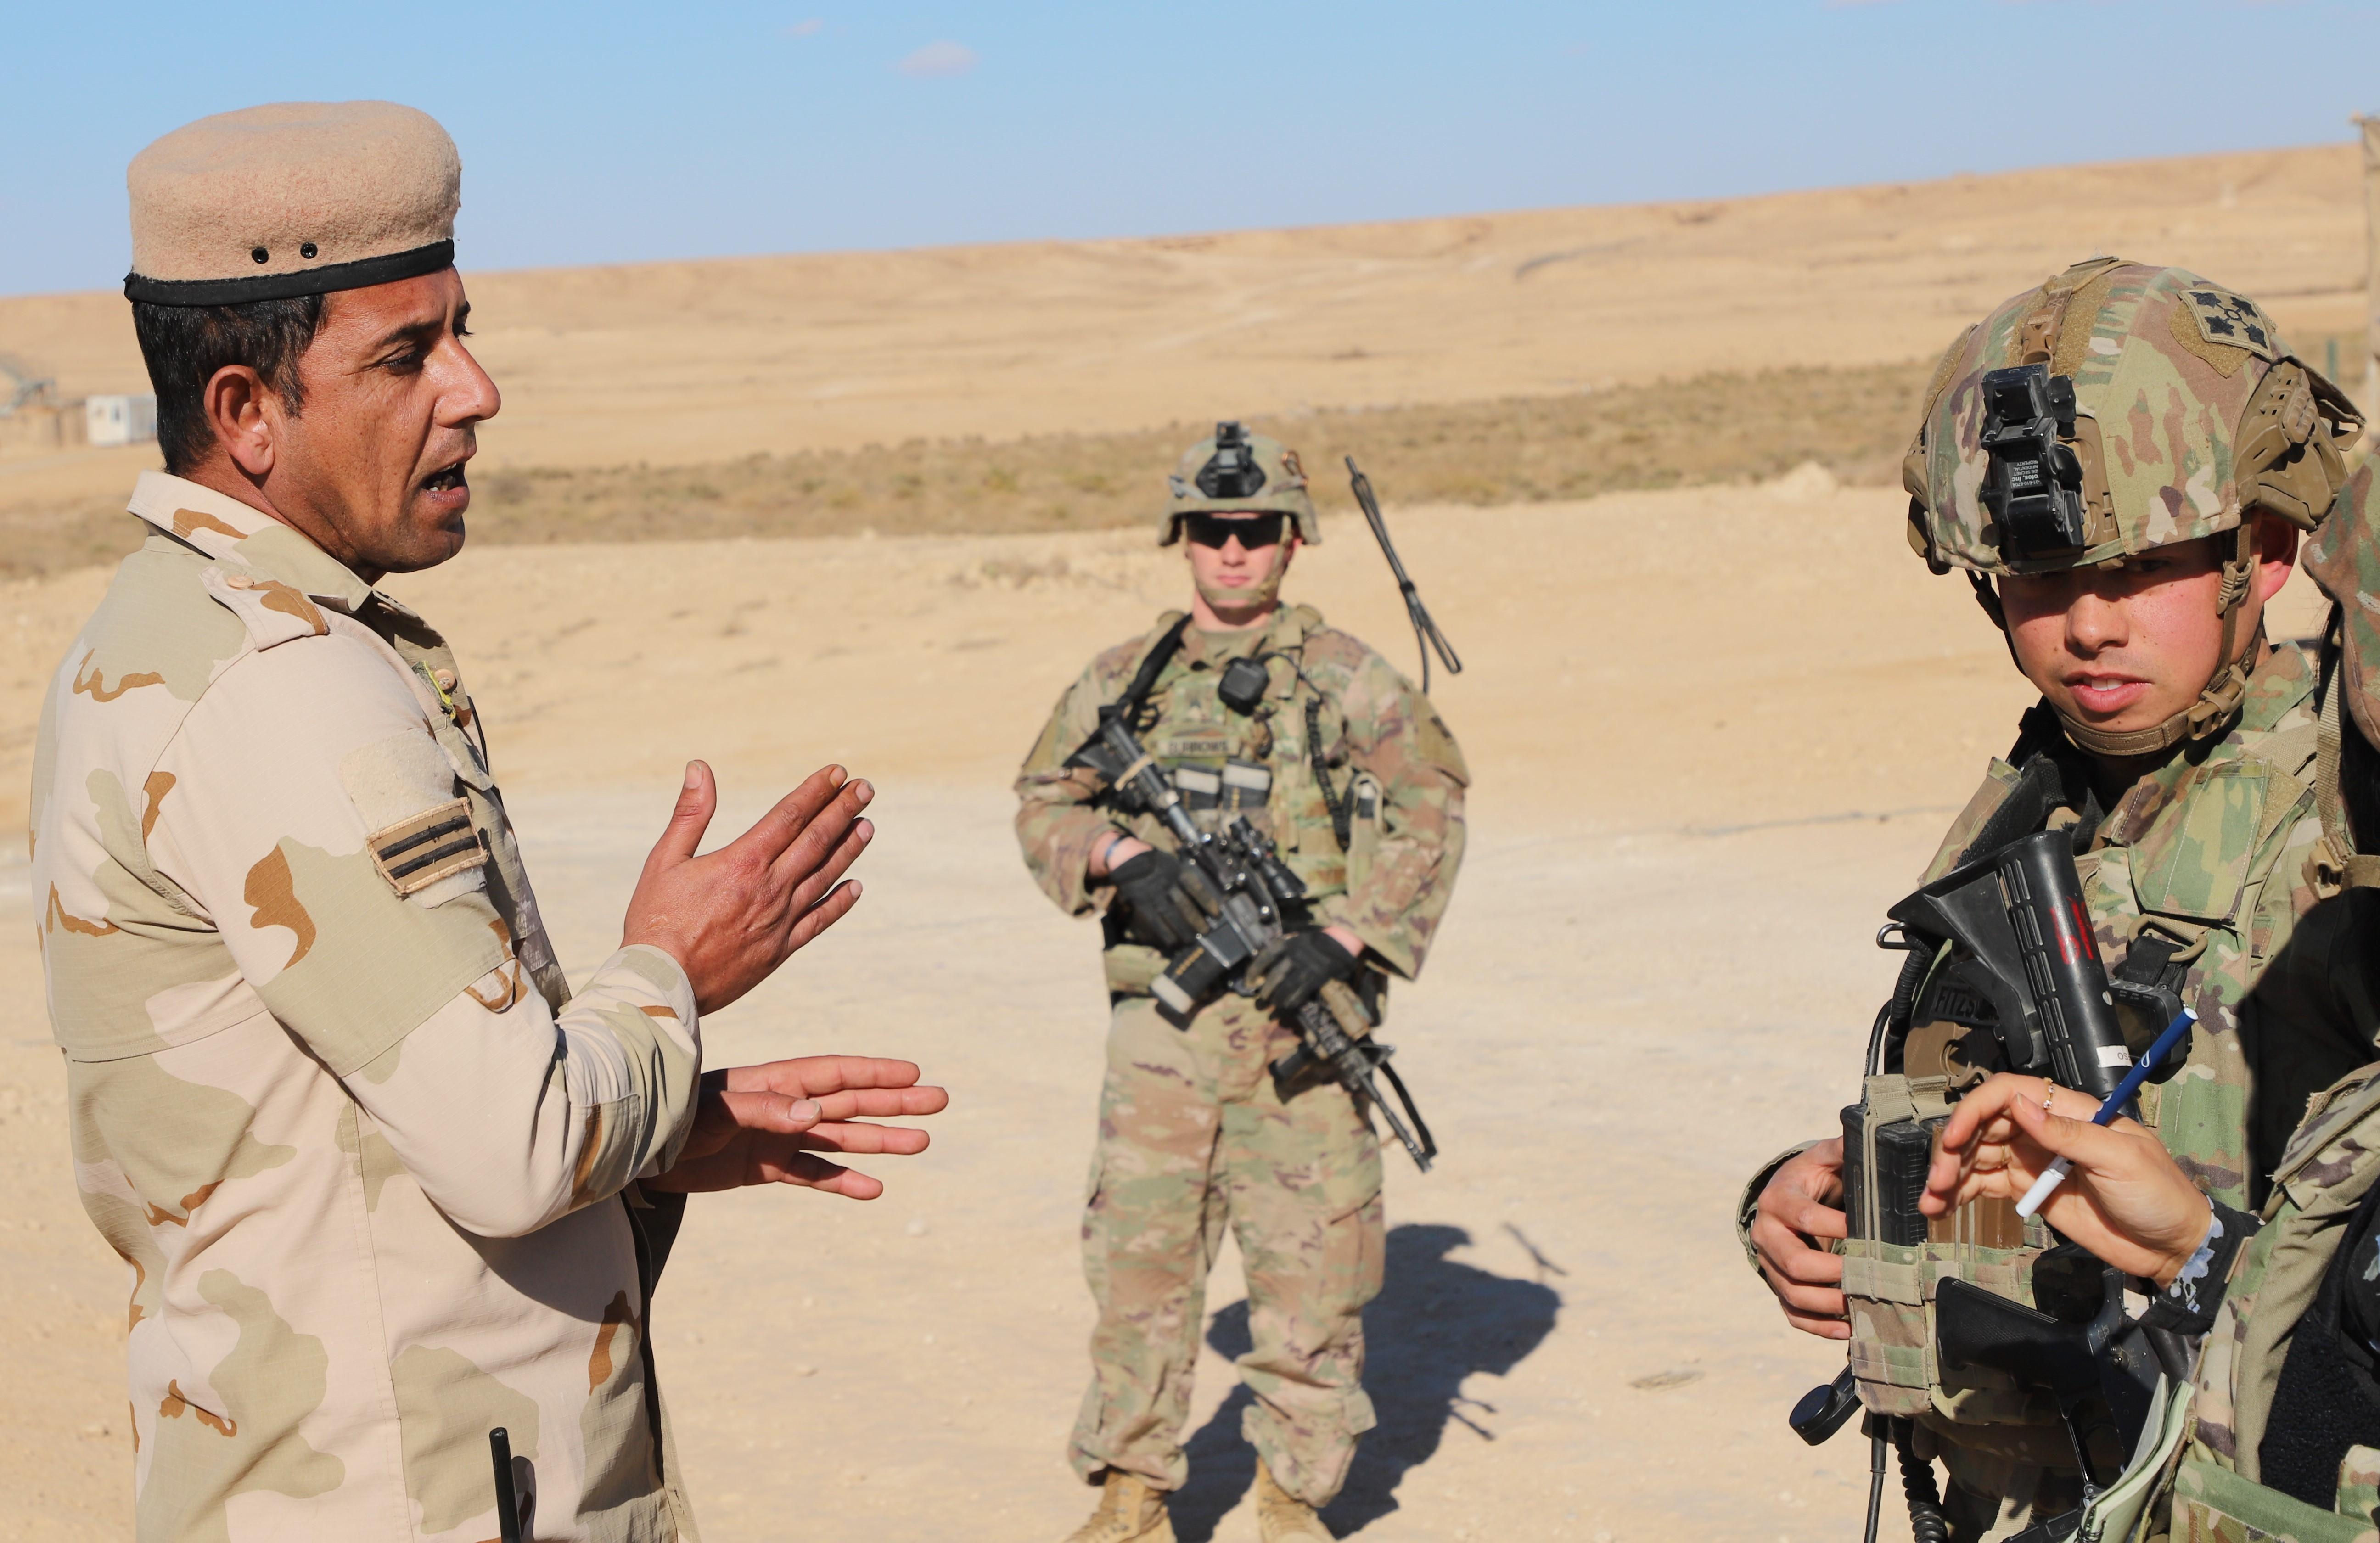 1st Lt. Matthew Fitzsimmons, platoon leader, Bravo Company, 4th Battalion, 9th Infantry Regiment, 1st Stryker Brigade Combat Team, 4th Infantry Division speaks with Spc. Ahmad Ali Khalaf, an Iraqi soldier stationed at a perimeter outpost at Al Asad Air Base on Dec. 21 2021